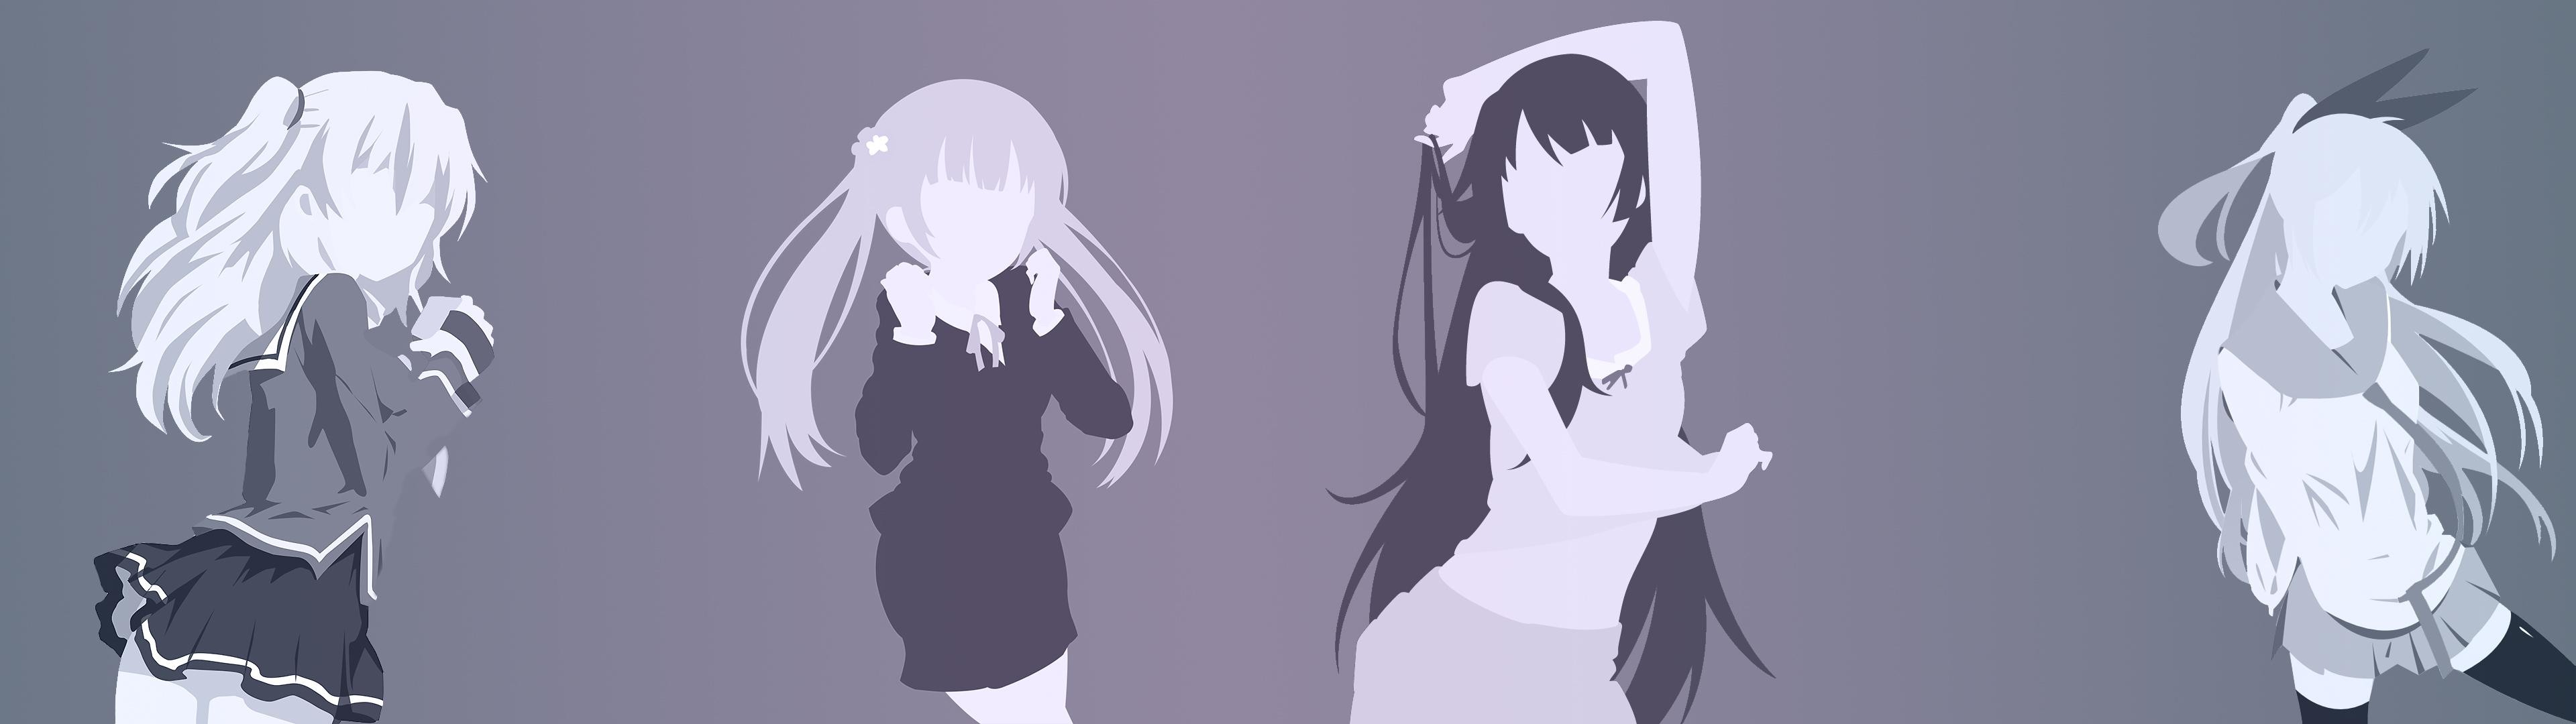 3840x1080 SimplisticStyled Girls from Different Animes () HD Wallpaper From  Gallsource.com